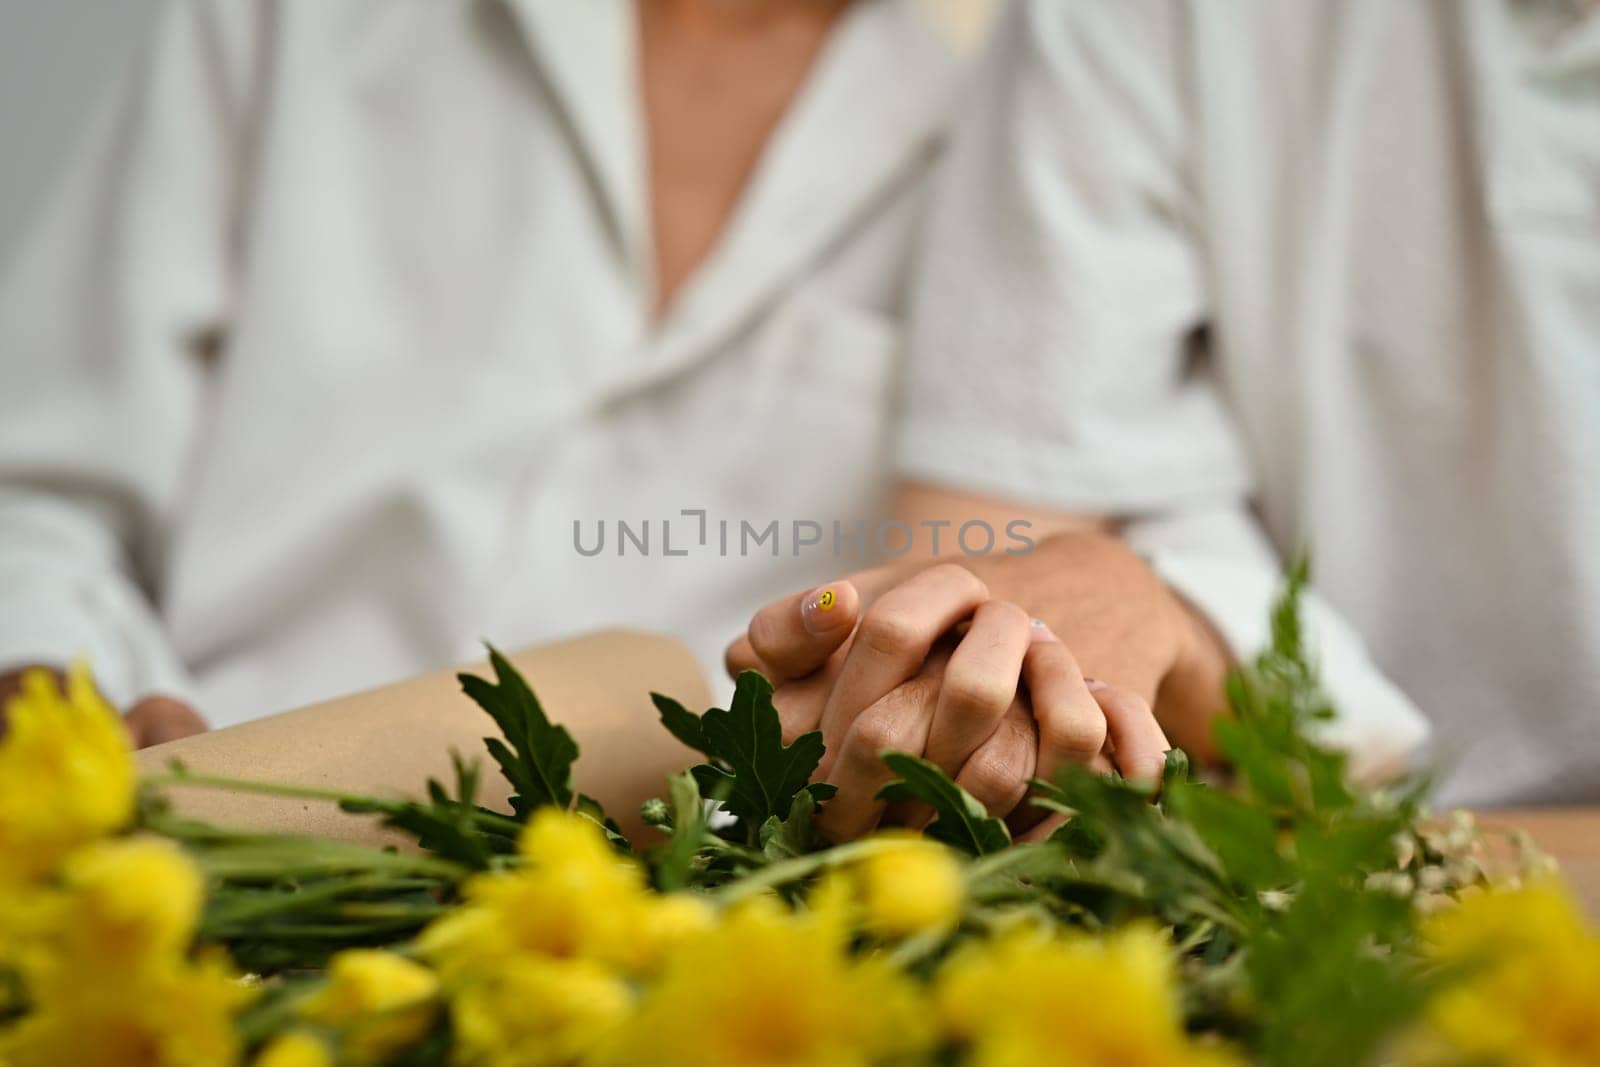 Anonymous gay couple clasping hands as symbol of homosexual love on table with flowers. LGBT, love and human rights concept.